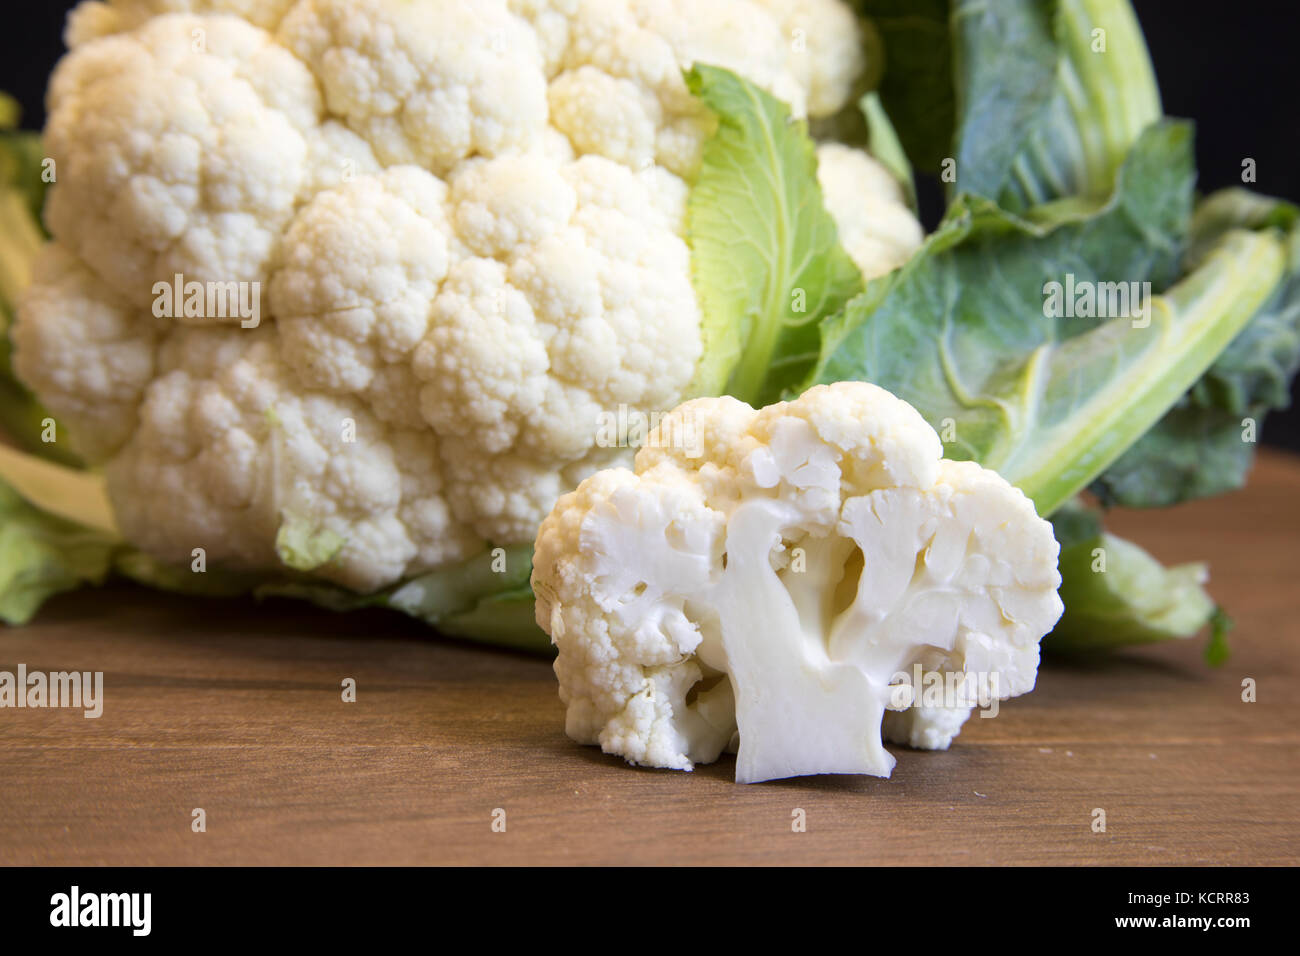 Close up of freah raw cauliflower head and floret on wooden board. Stock Photo